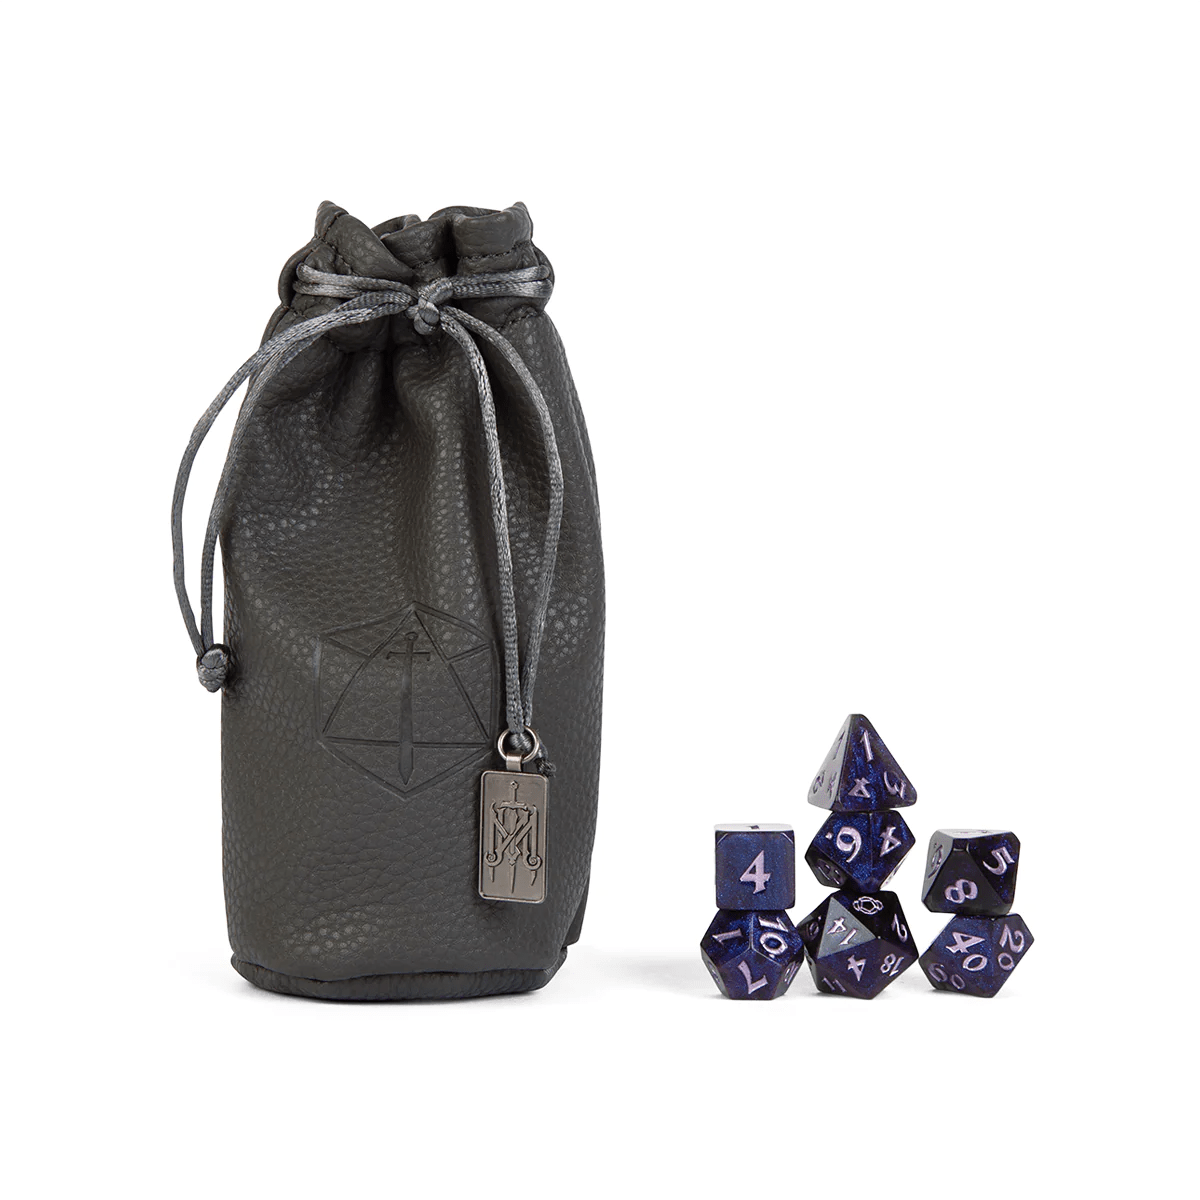 Mighty Nein Dice Set: Essek Thelyss (Grey/Purple) - The Fourth Place